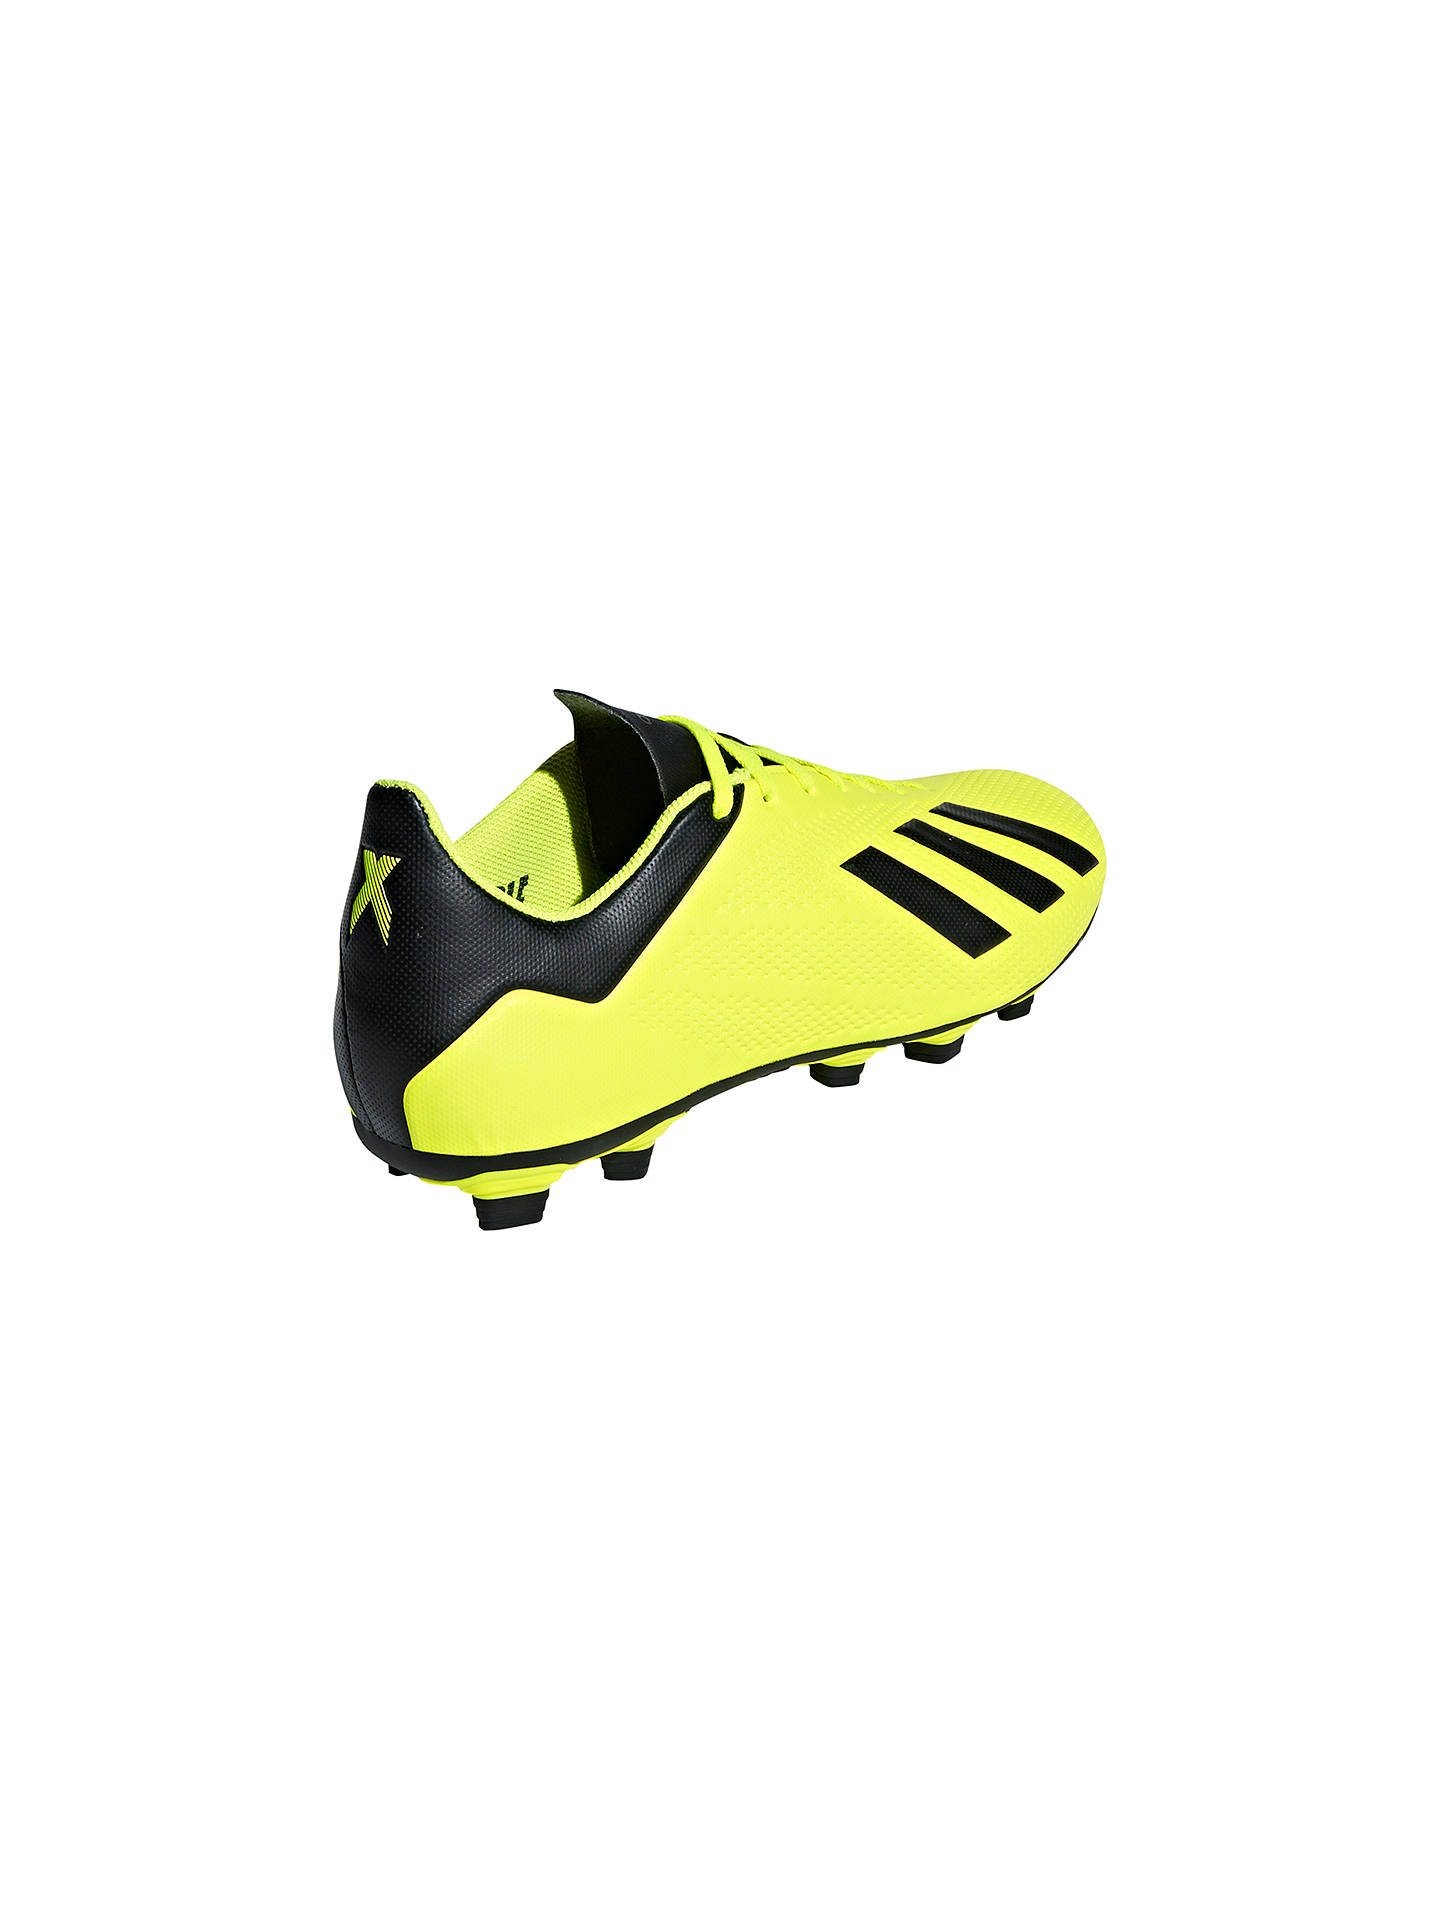 Adidas X 18 4 Fg Firm Ground Football Boots Solar Yellow Core